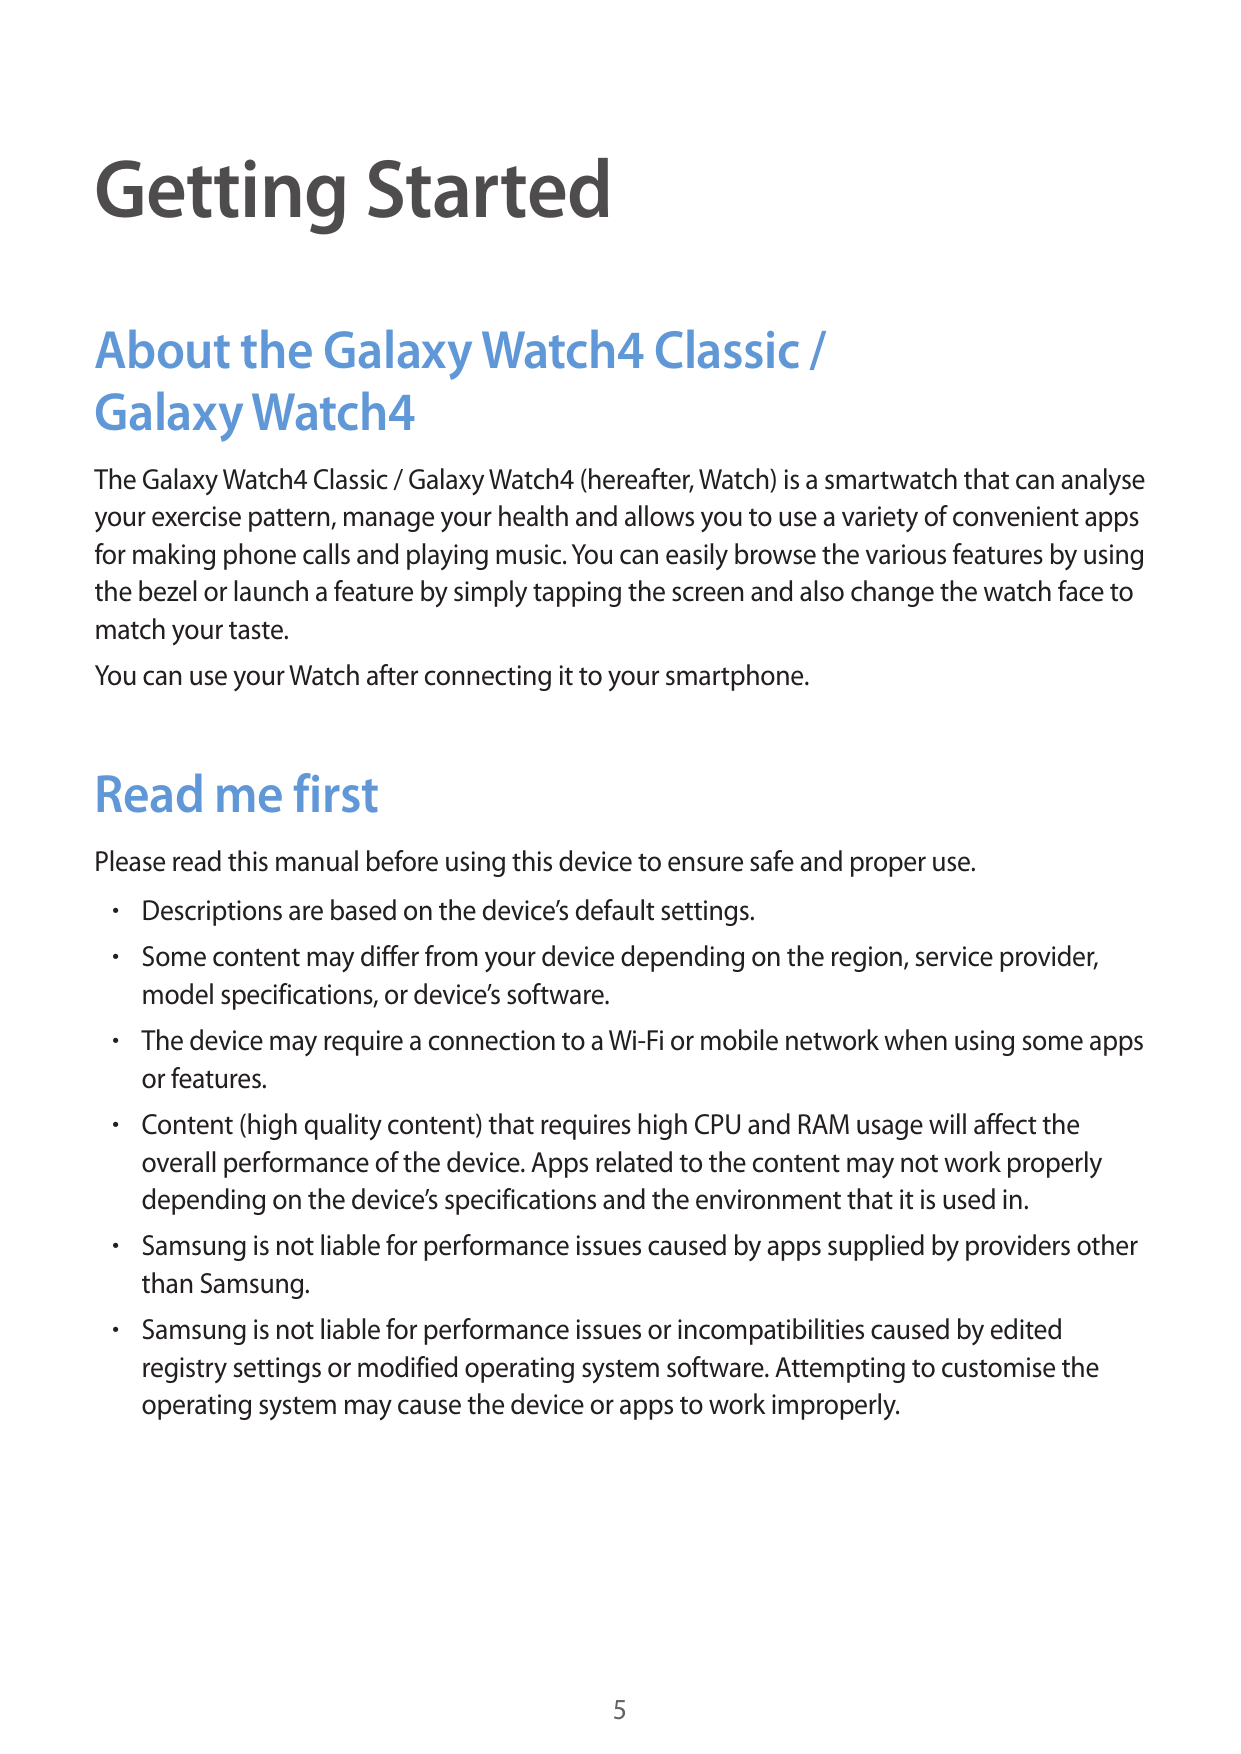 Getting StartedAbout the Galaxy Watch4 Classic /Galaxy Watch4The Galaxy Watch4 Classic / Galaxy Watch4 (hereafter, Watch) is a s